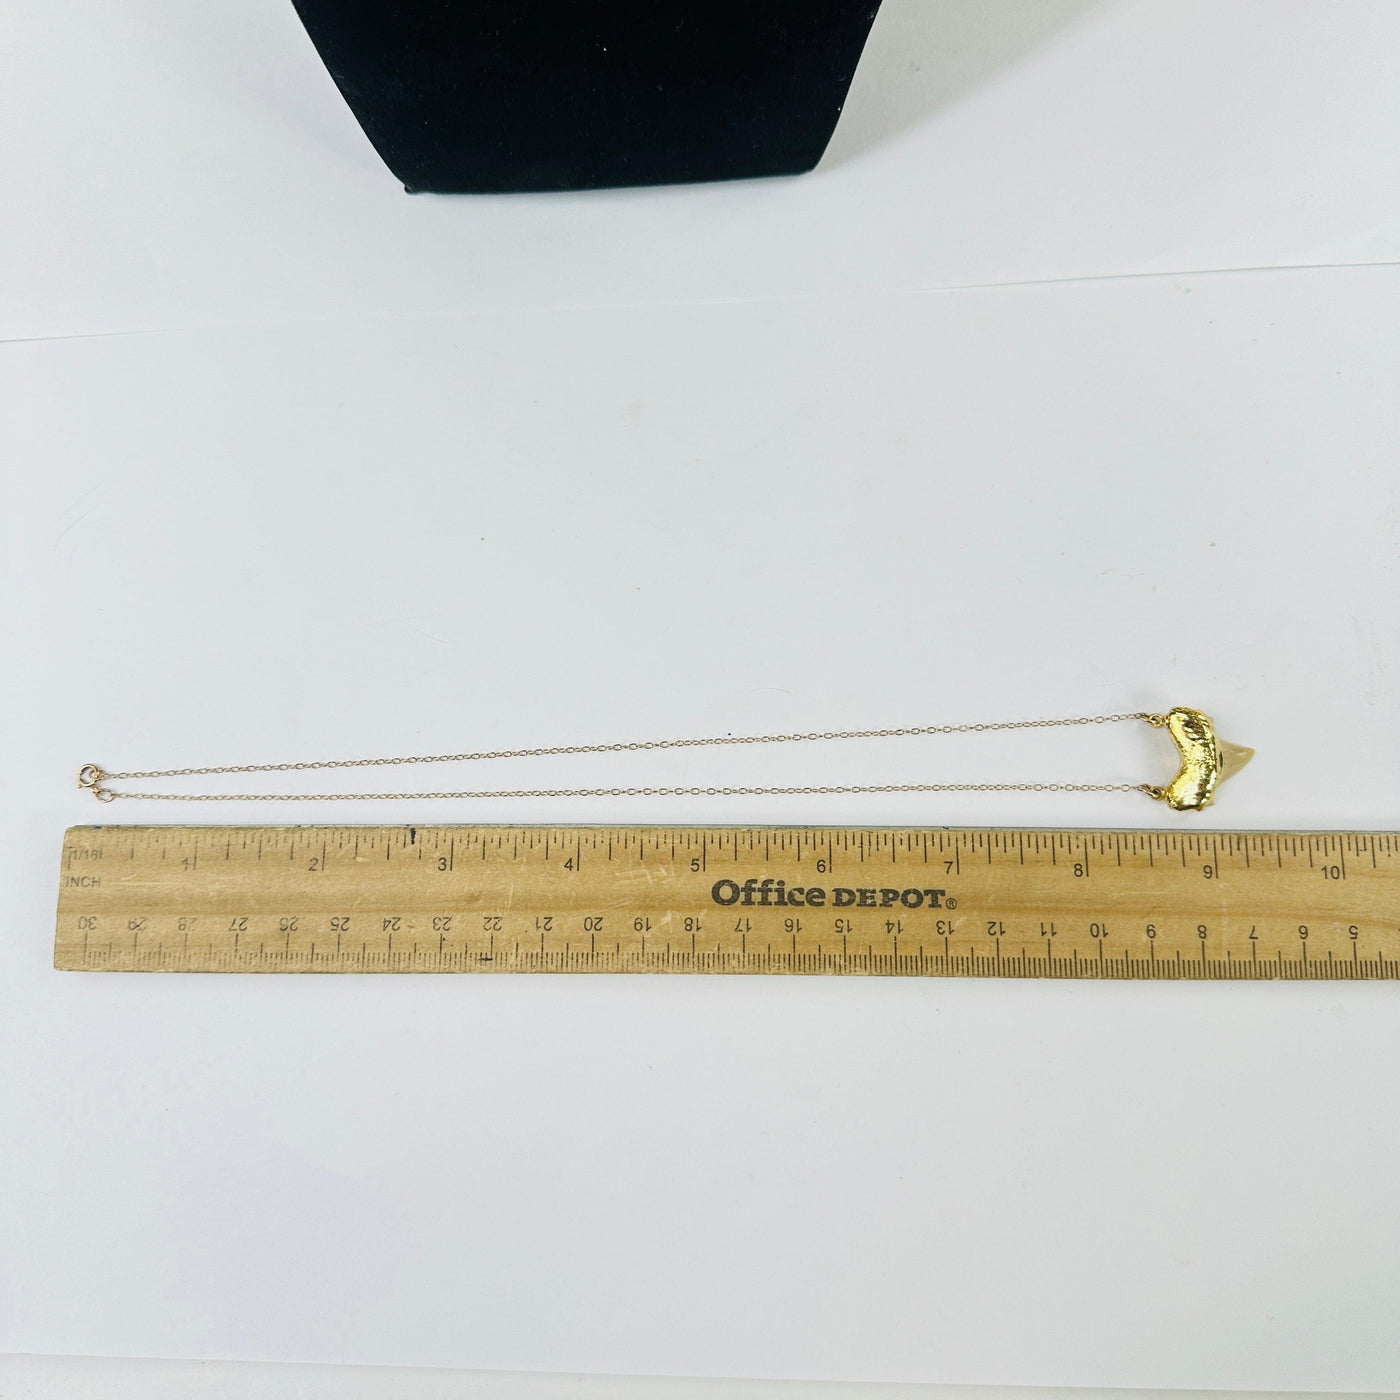 shark tooth necklace next to a ruler for size reference